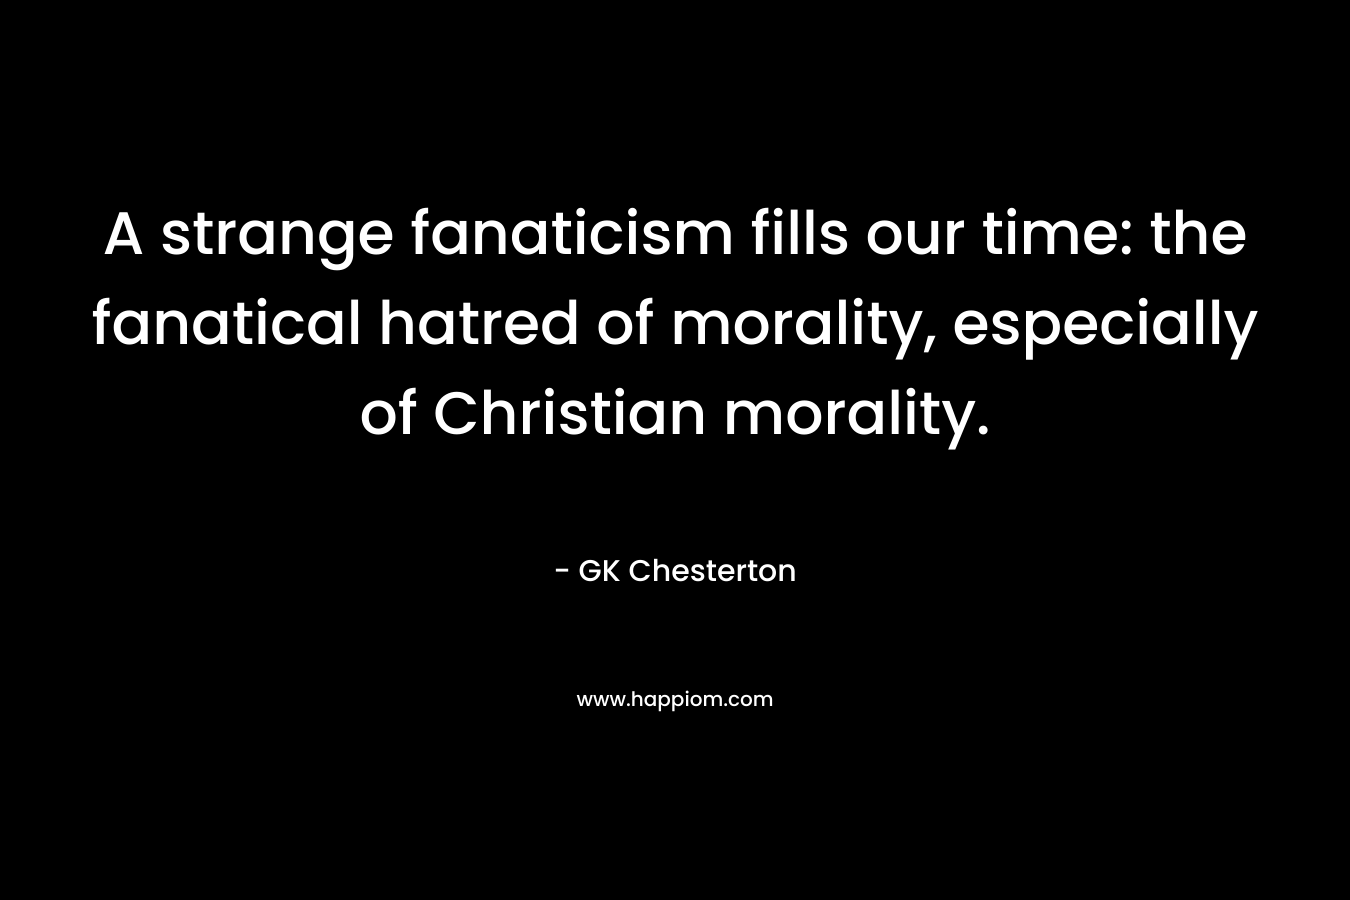 A strange fanaticism fills our time: the fanatical hatred of morality, especially of Christian morality.